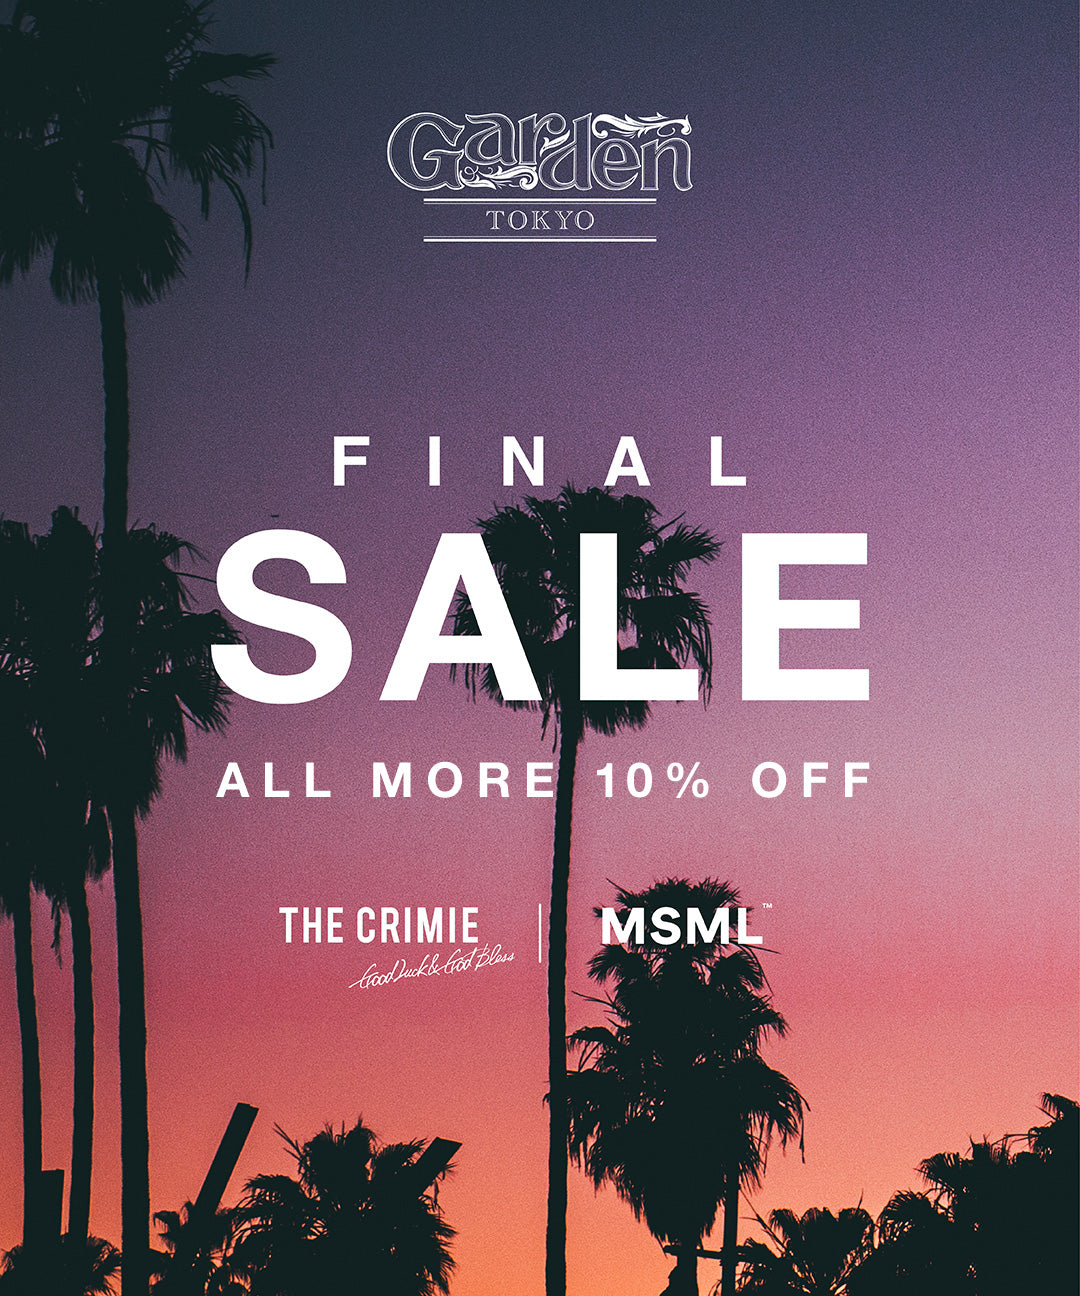 FINAL SALE ALL MORE 10% OFF